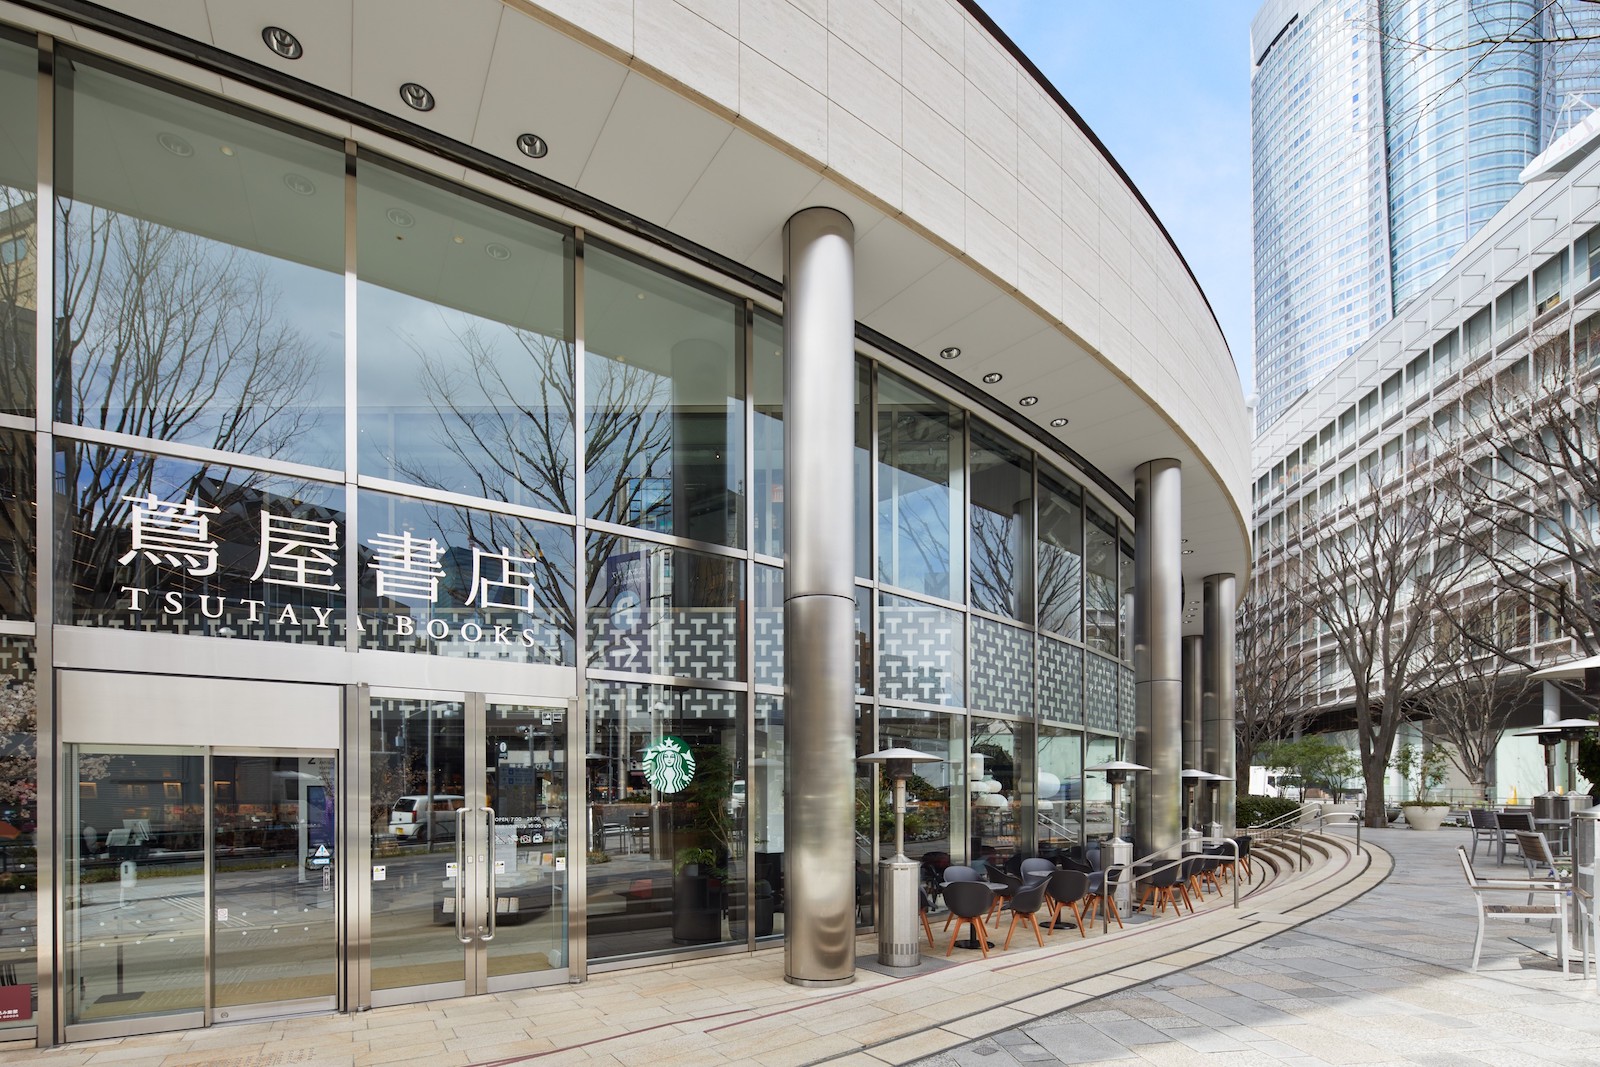 Tsutaya Tokyo Roppongi Reopens With Brand New Look Concept Japan Today